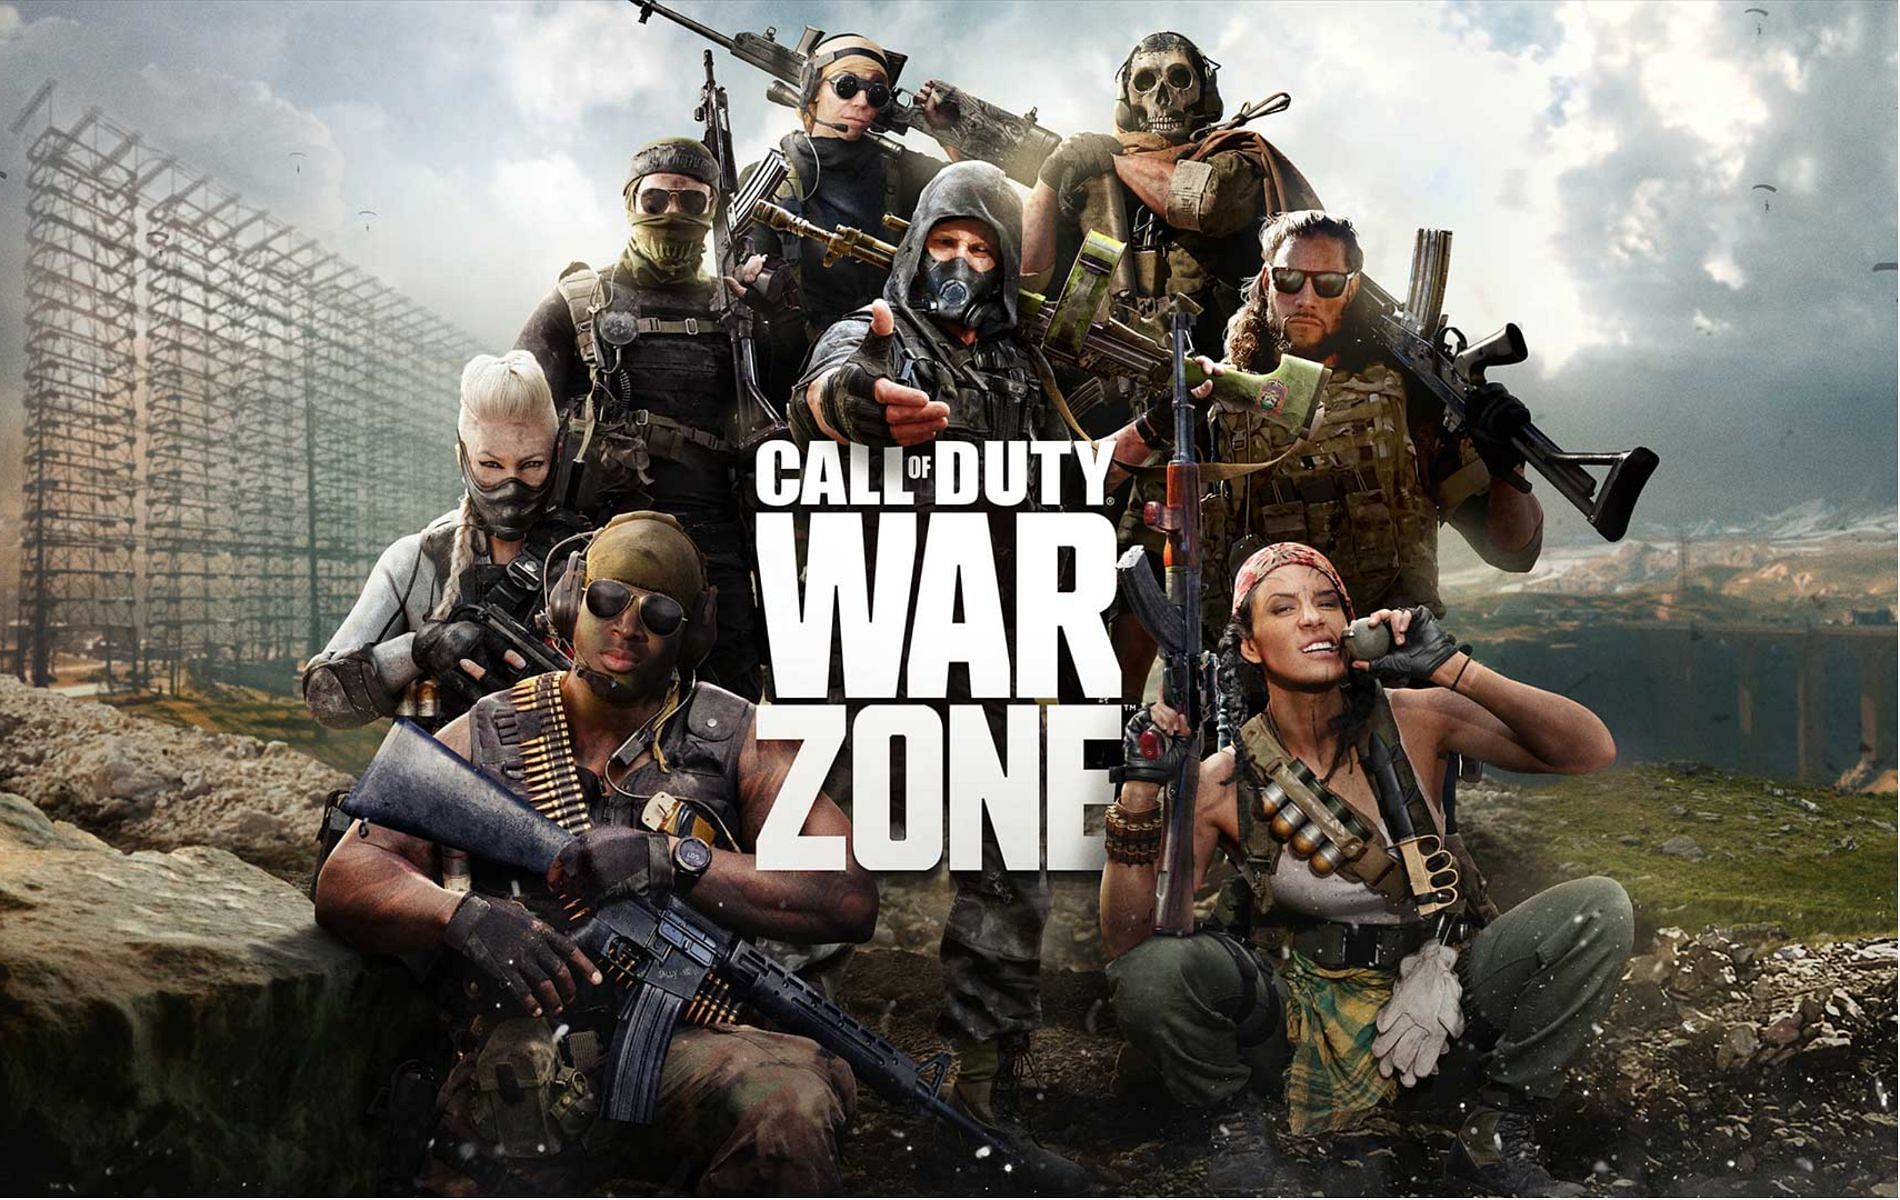 Welcome to Call of Duty Warzone (Image by Activision)